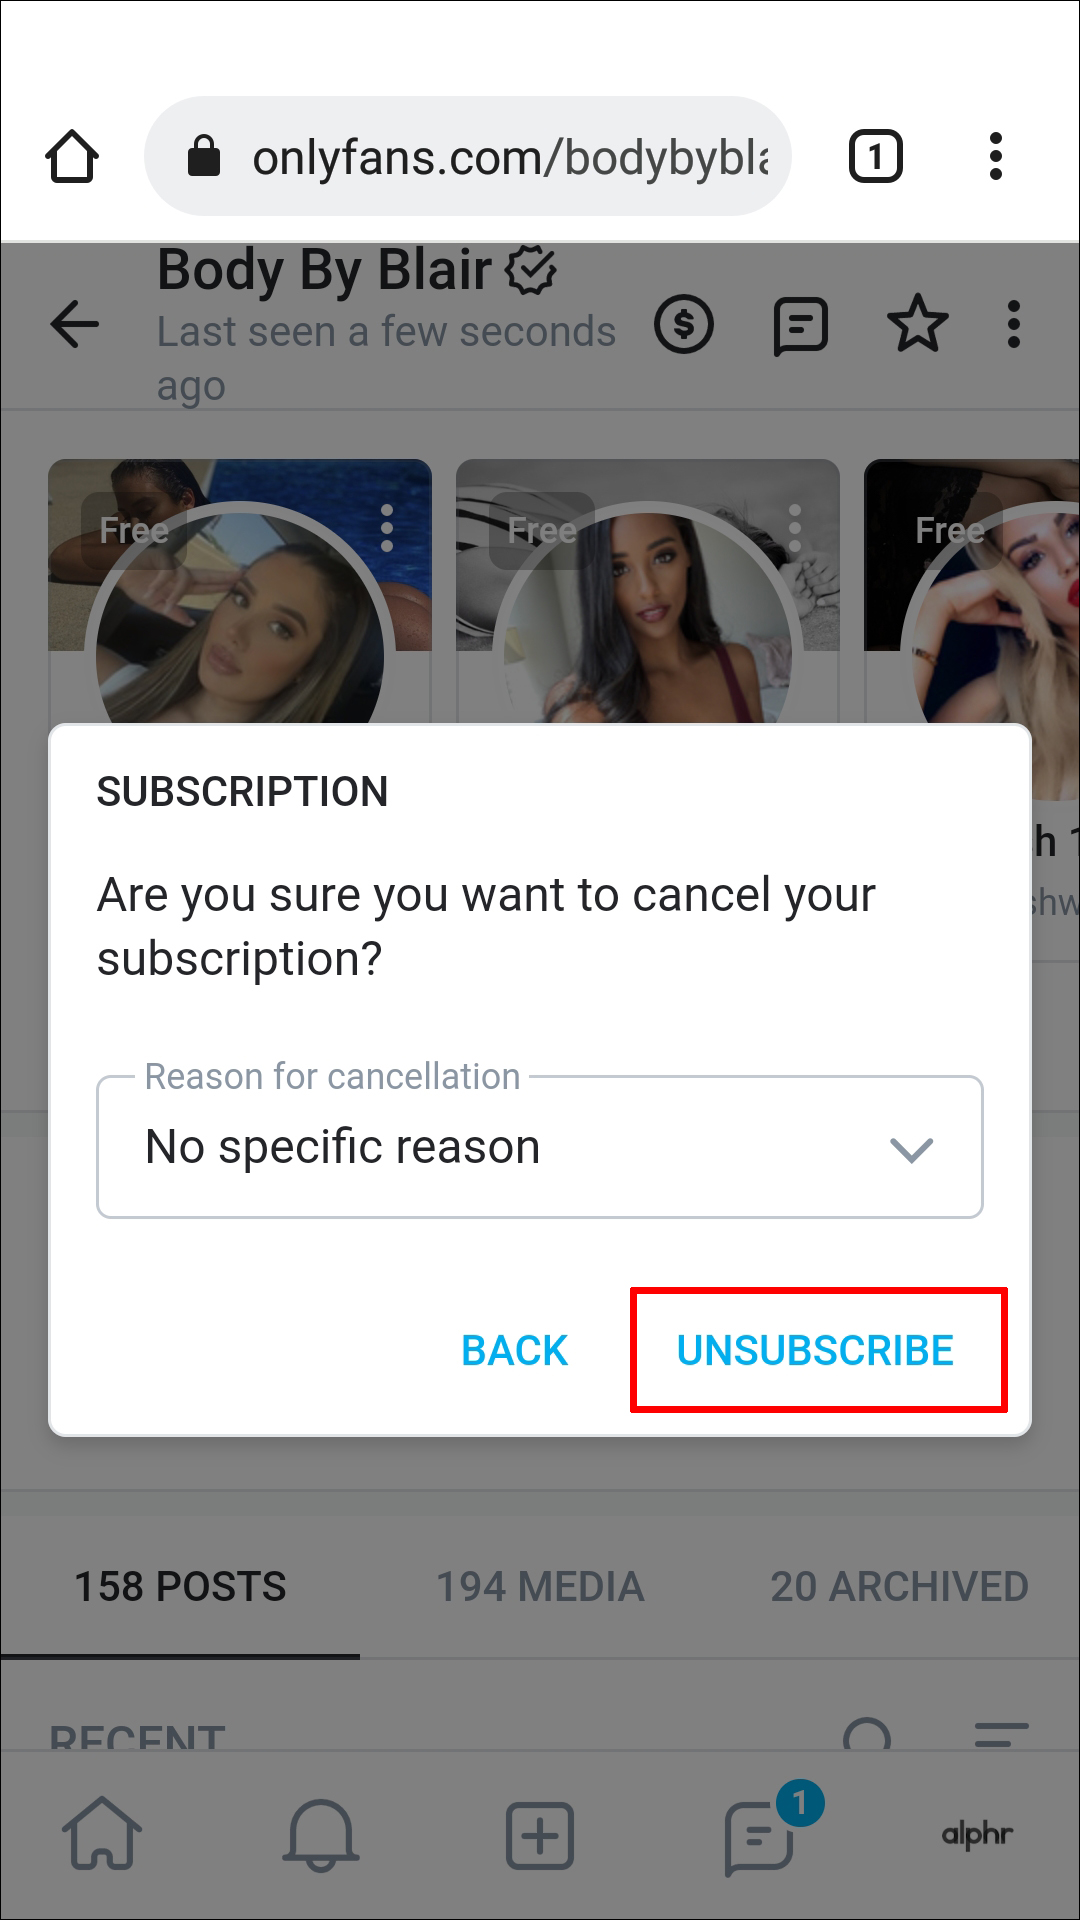 Can you unsubscribe from onlyfans